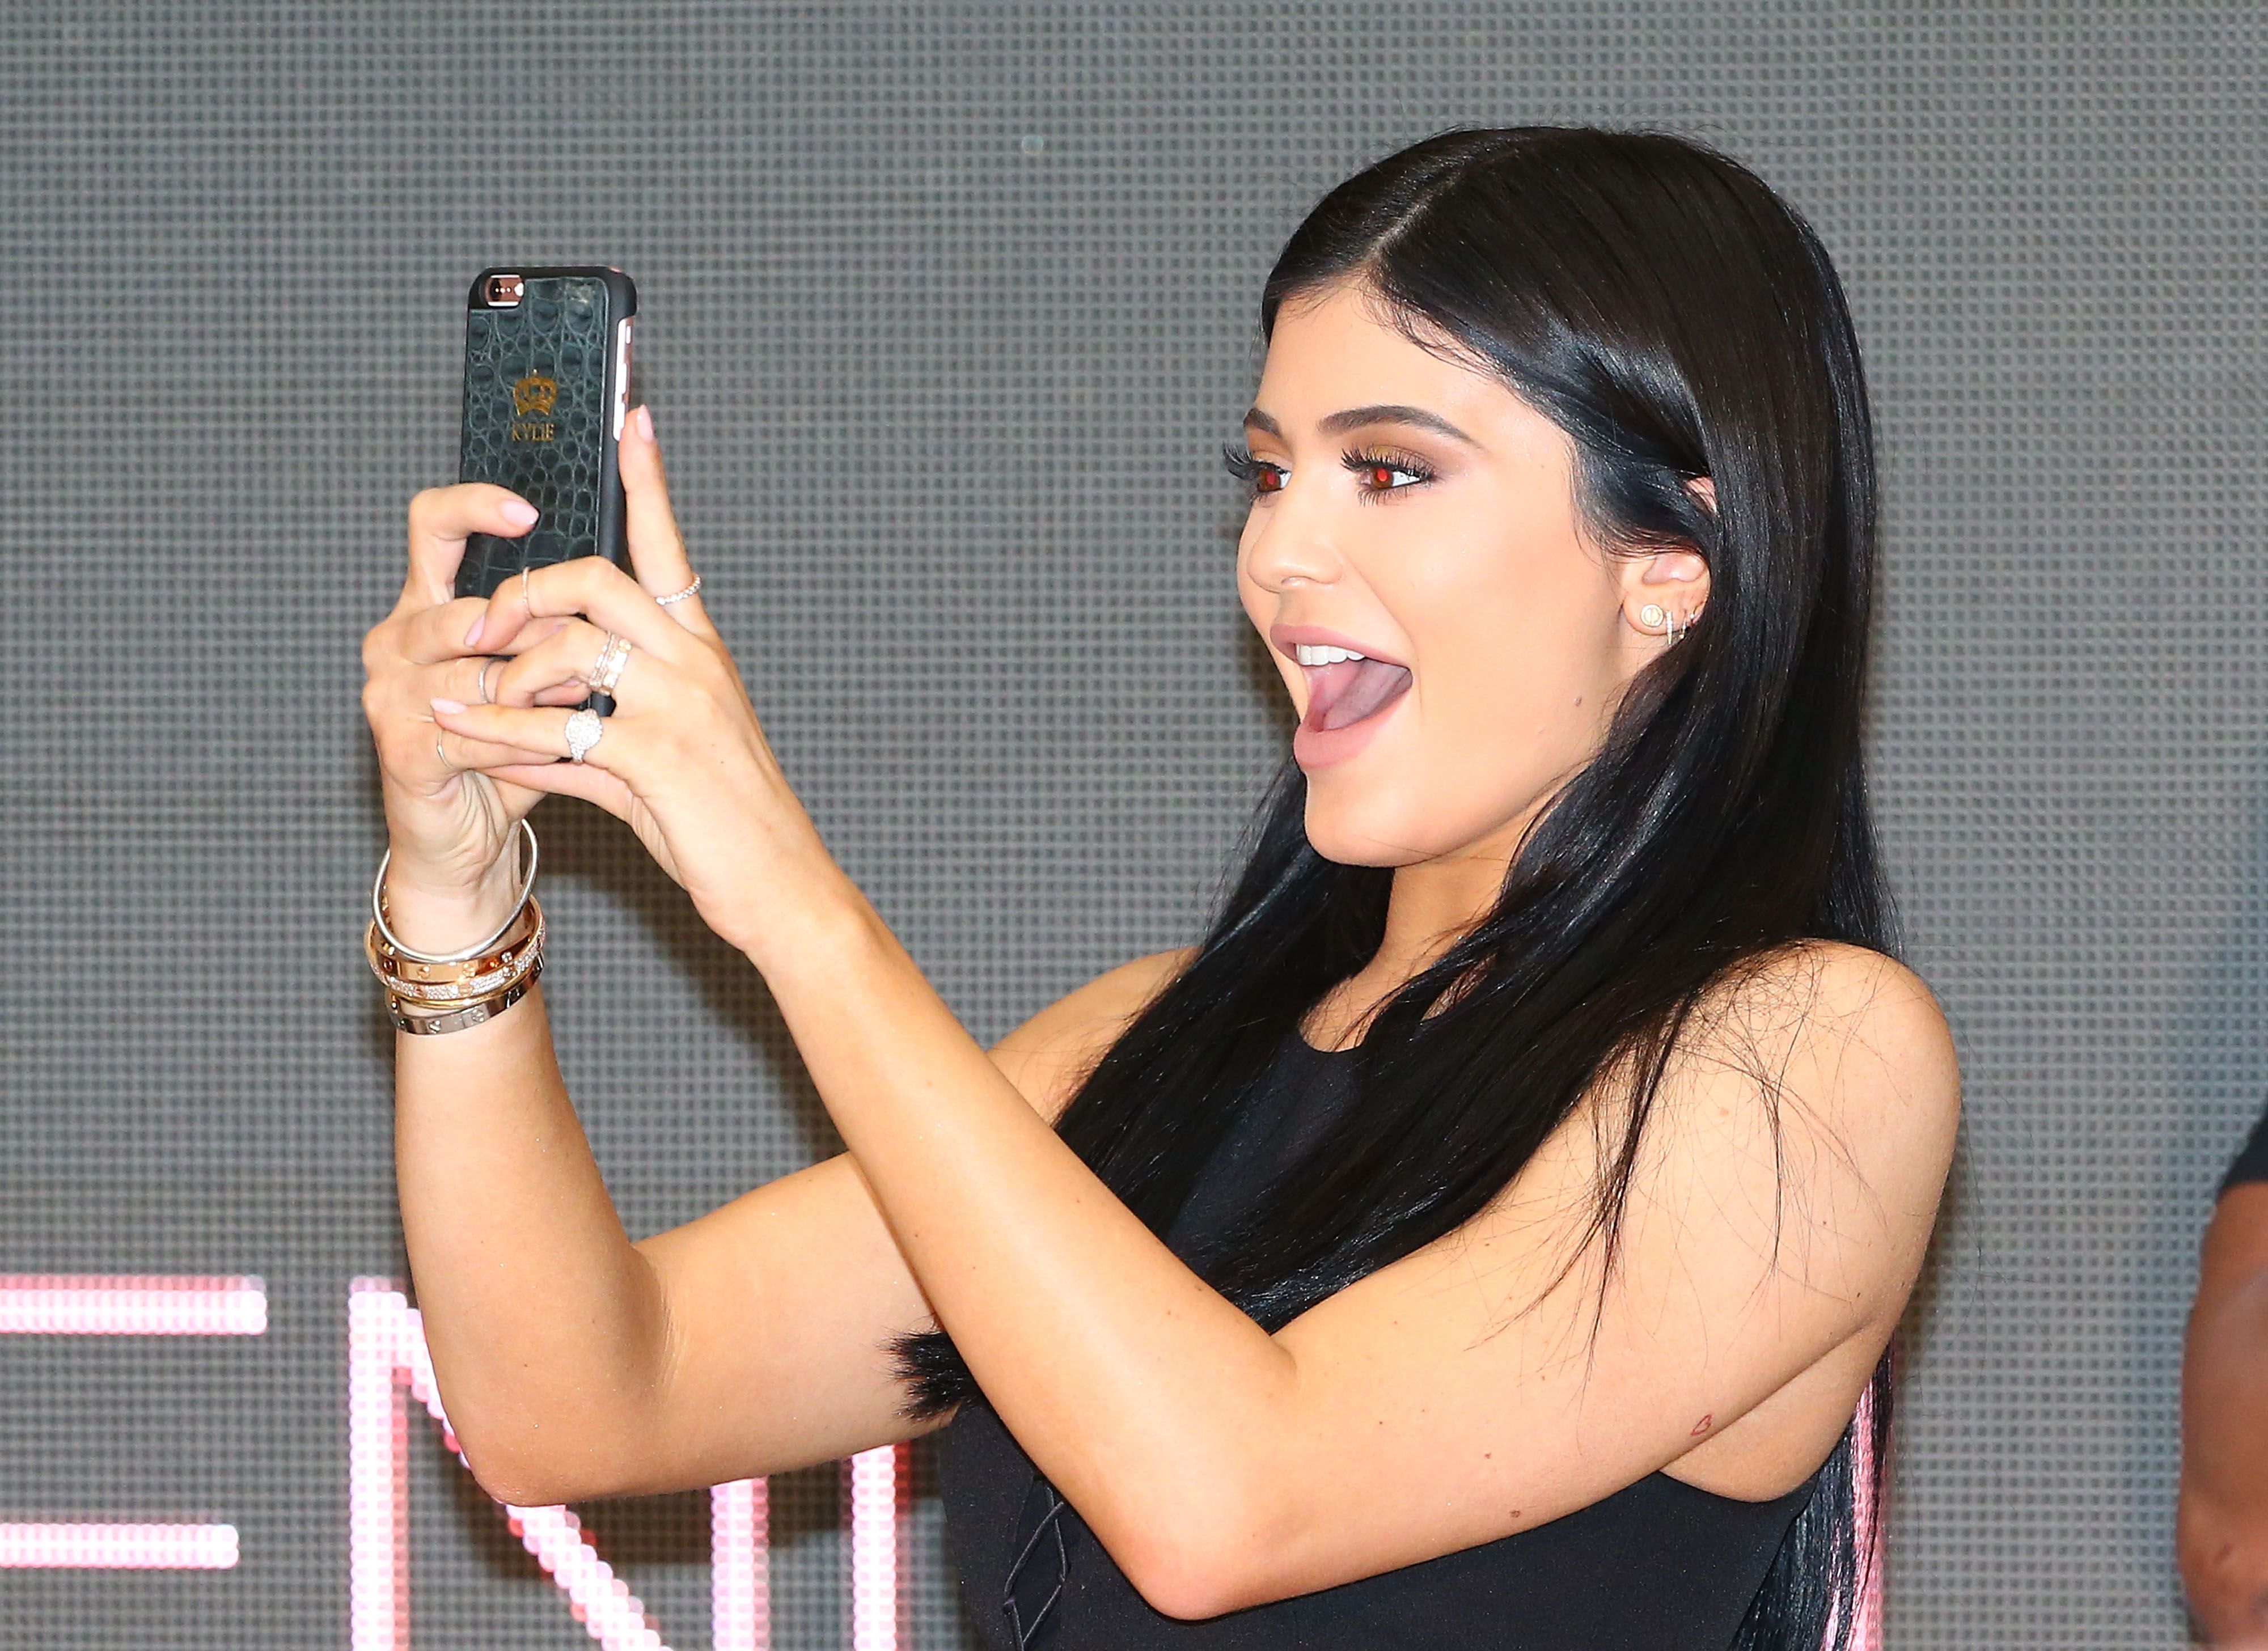 Kylie Jenner mum-shamed for leaving baby at home to attend Coachella